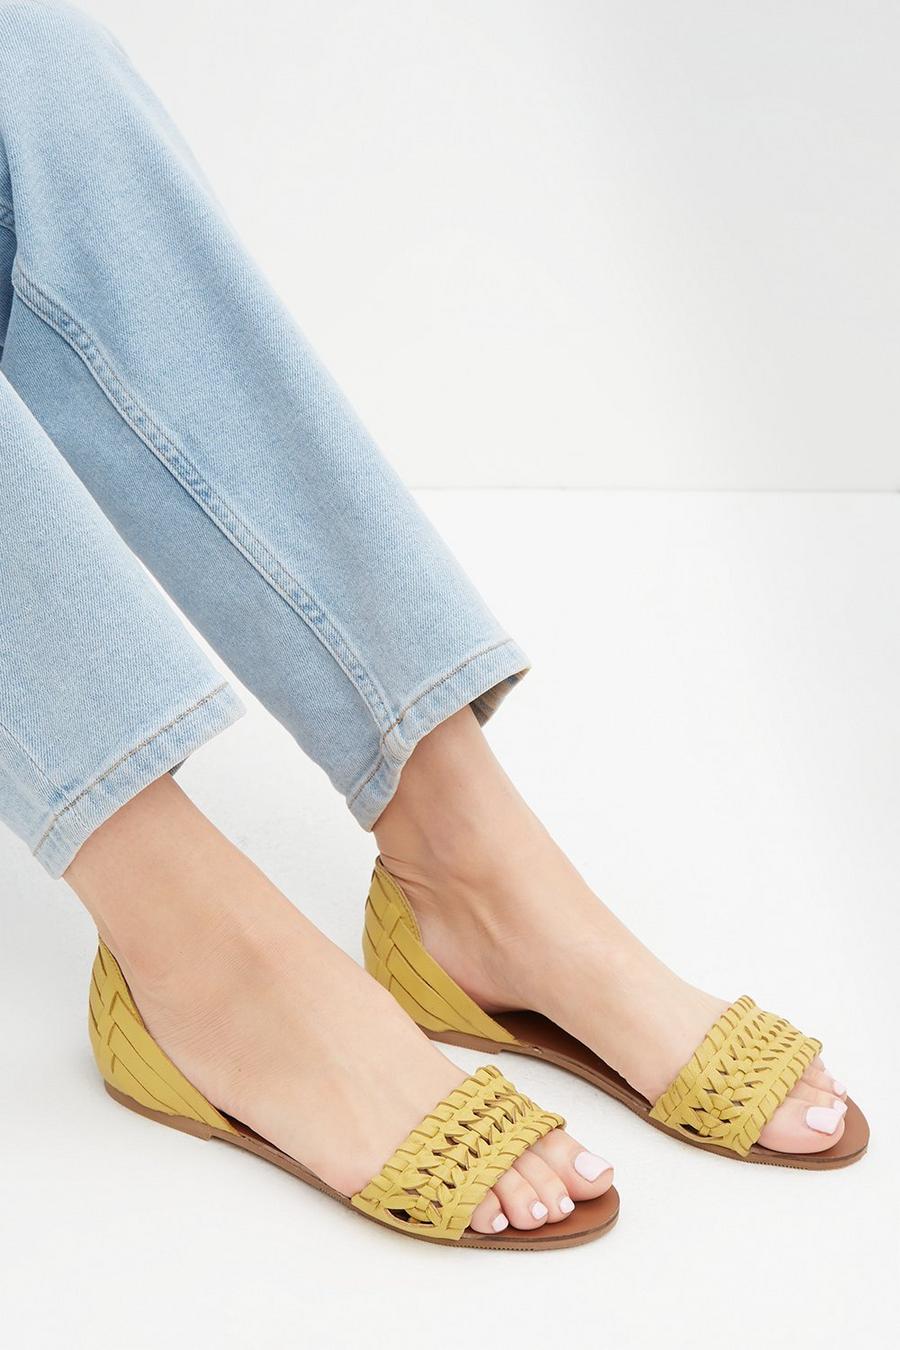 Wide Fit Leather Yellow Jingly Weave Sandals